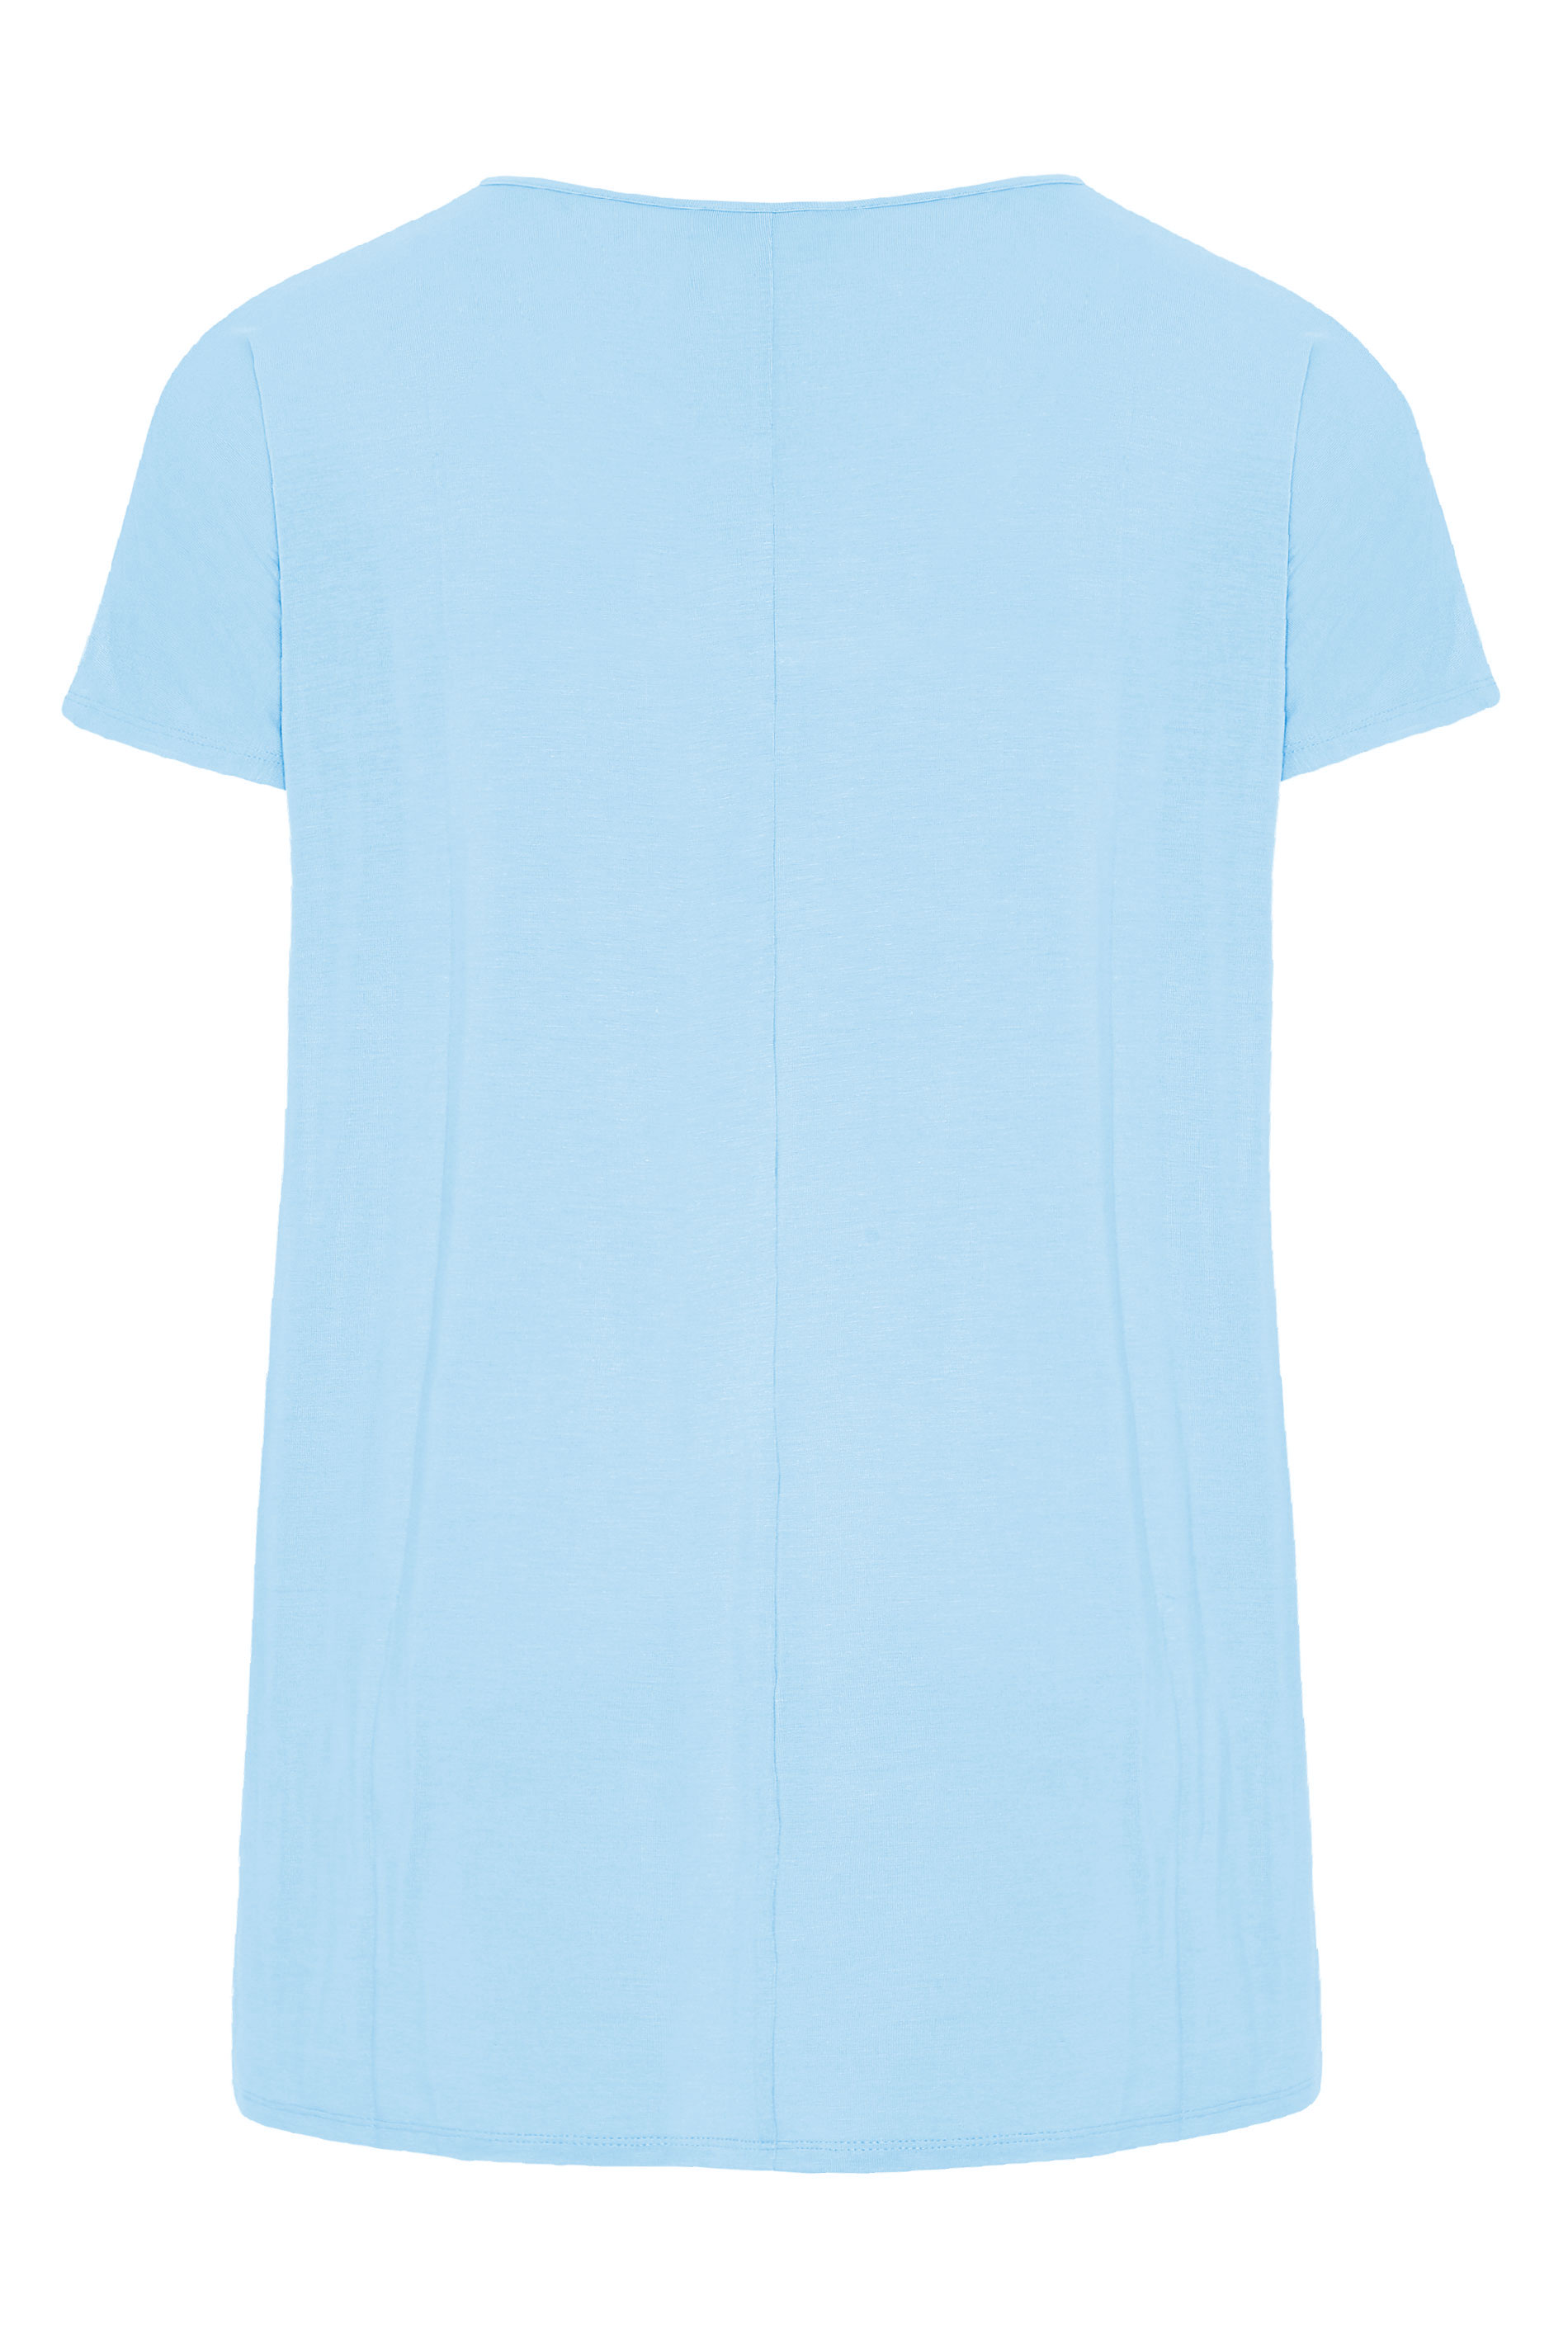 Pale Blue Grown on Sleeve T-Shirt | Yours Clothing